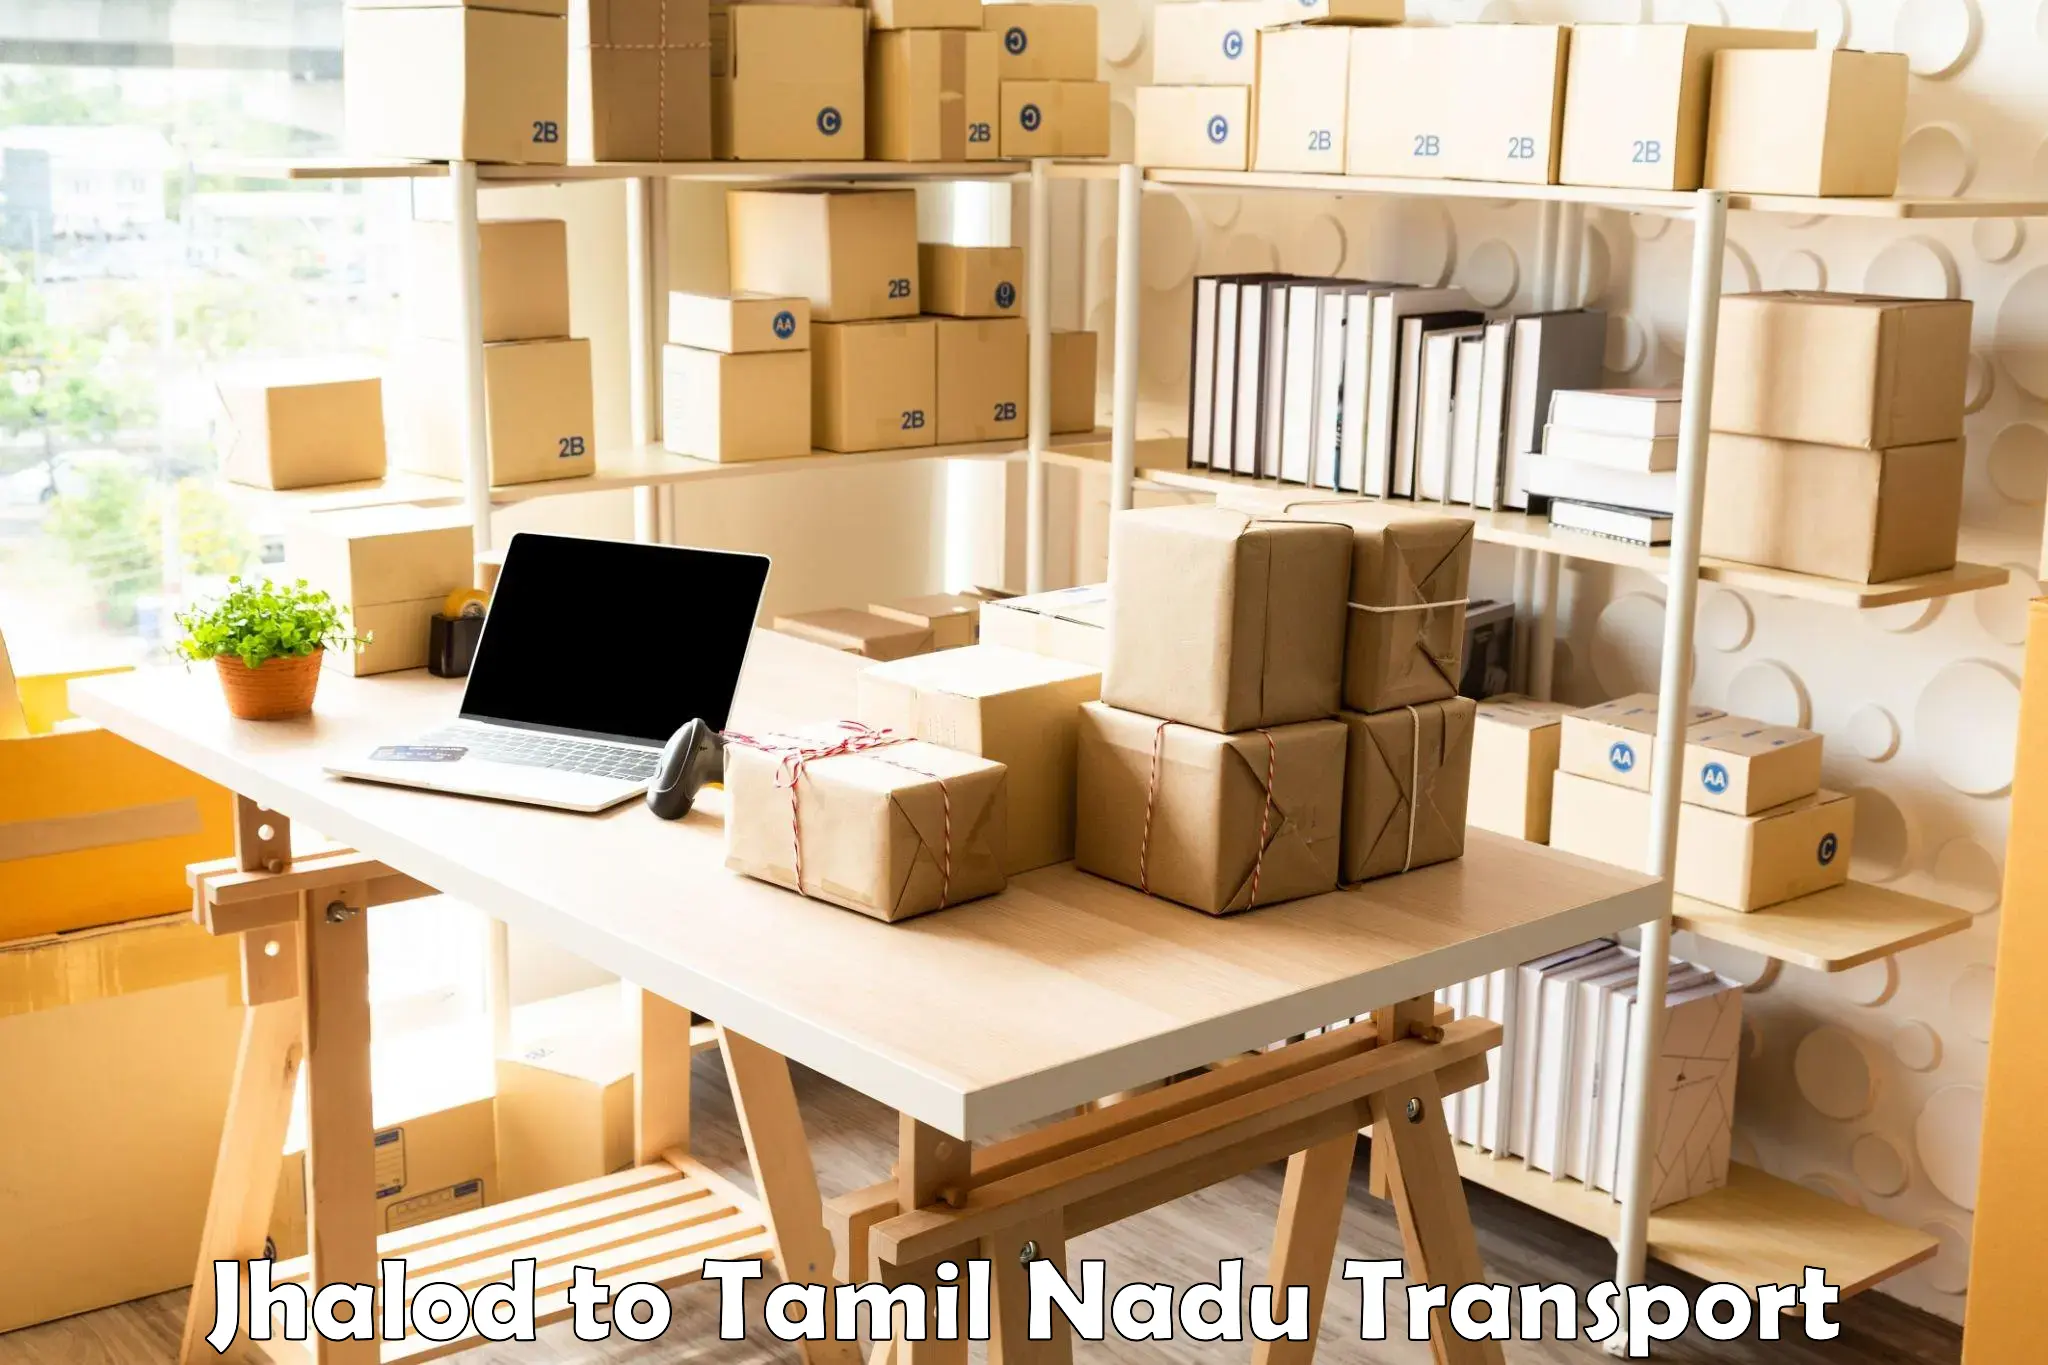 Air freight transport services in Jhalod to Avinashi